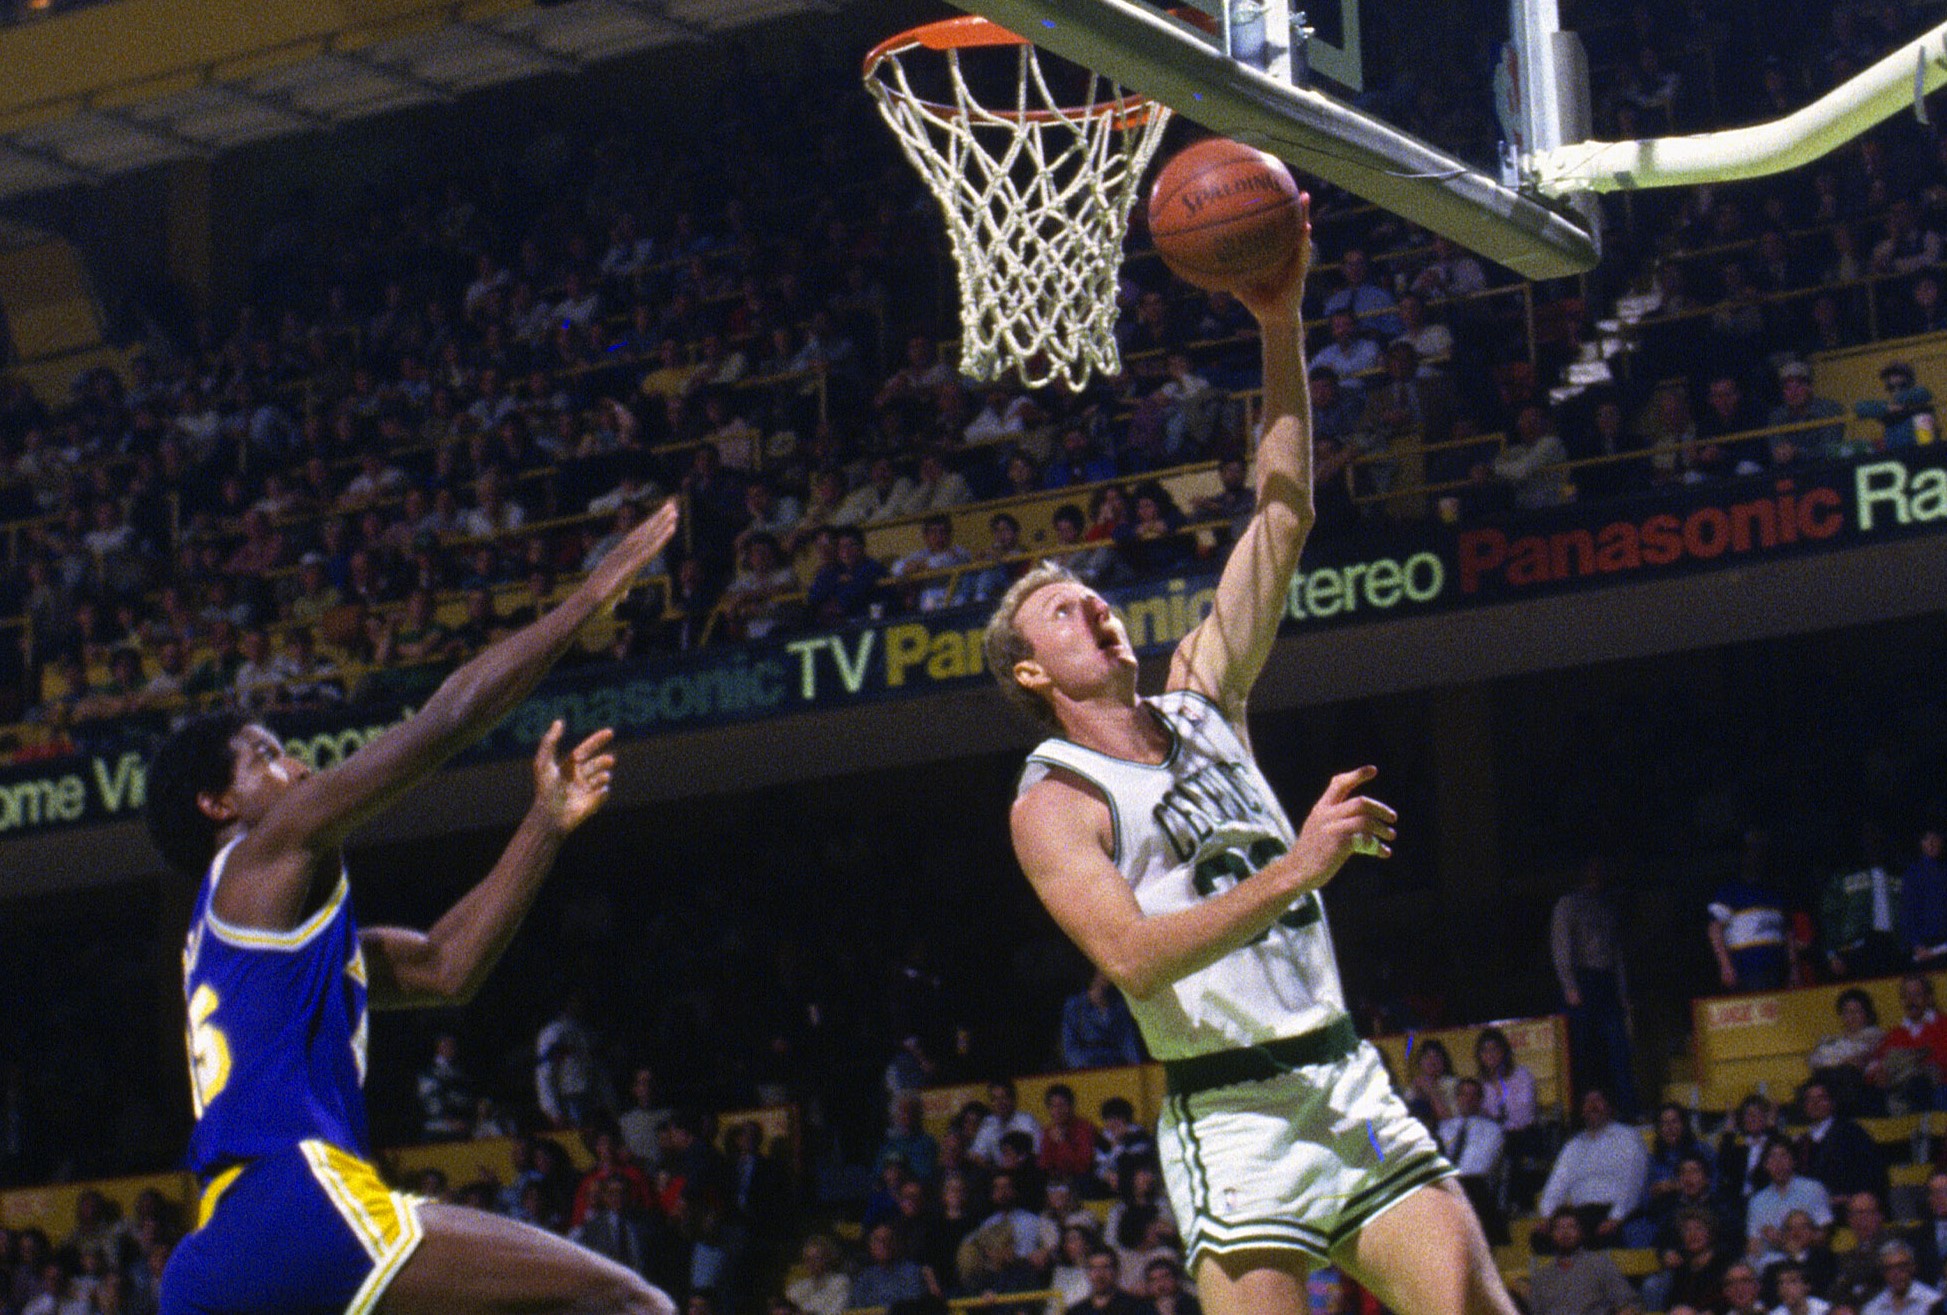 Larry Bird of the Boston Celtics lays the ball up in front of A.C. Green of the Los Angeles Lakers.